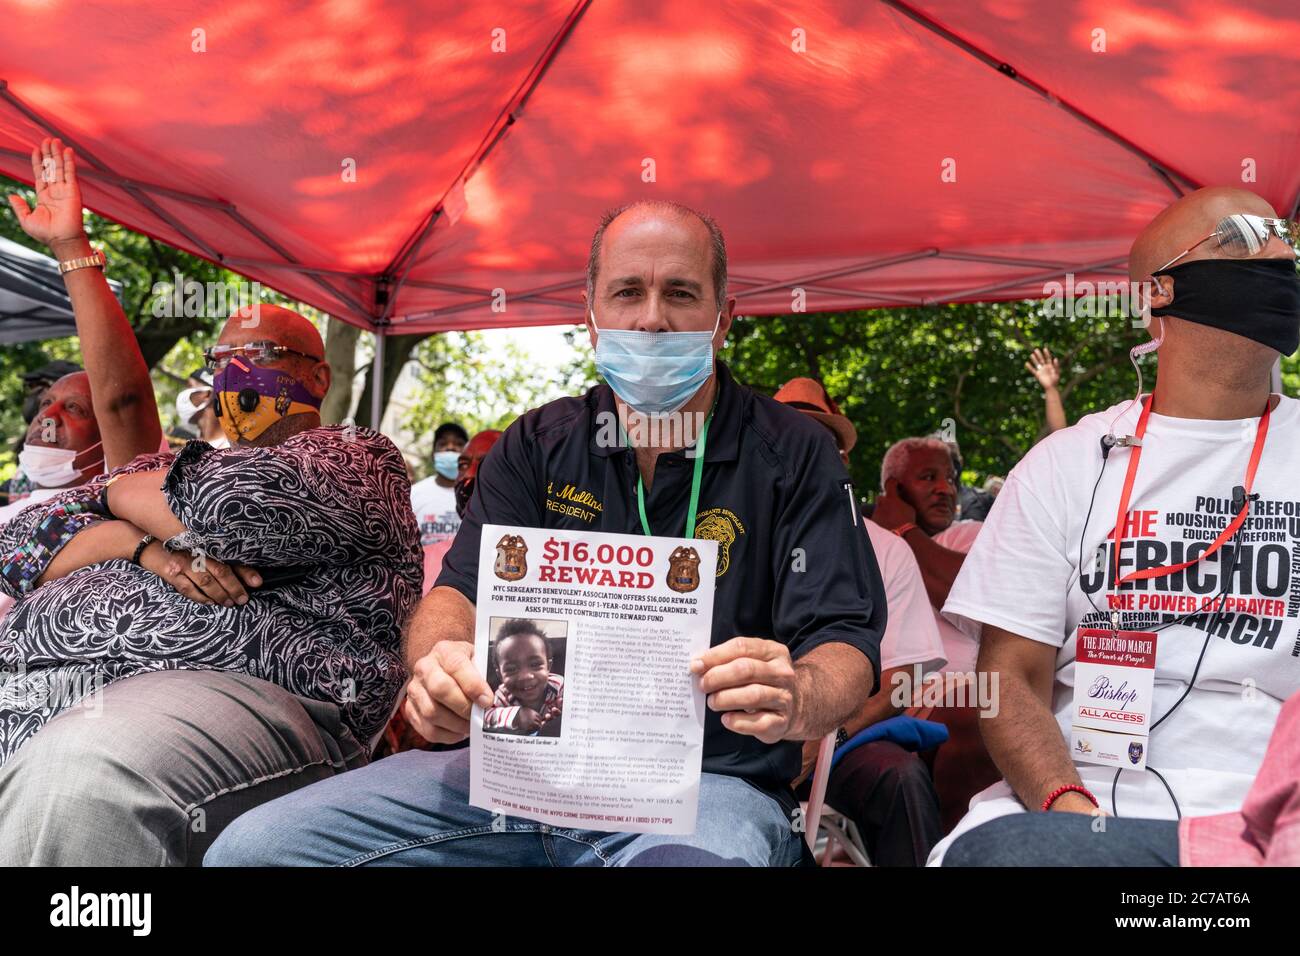 New York, NY - July 15, 2020: President of SBA Ed Mullins holds poster offering award to capture killer of 1-year-old Davell Gardner Jr at Jericho The Power of Prayer rally and march against gun violence at City Hall Stock Photo